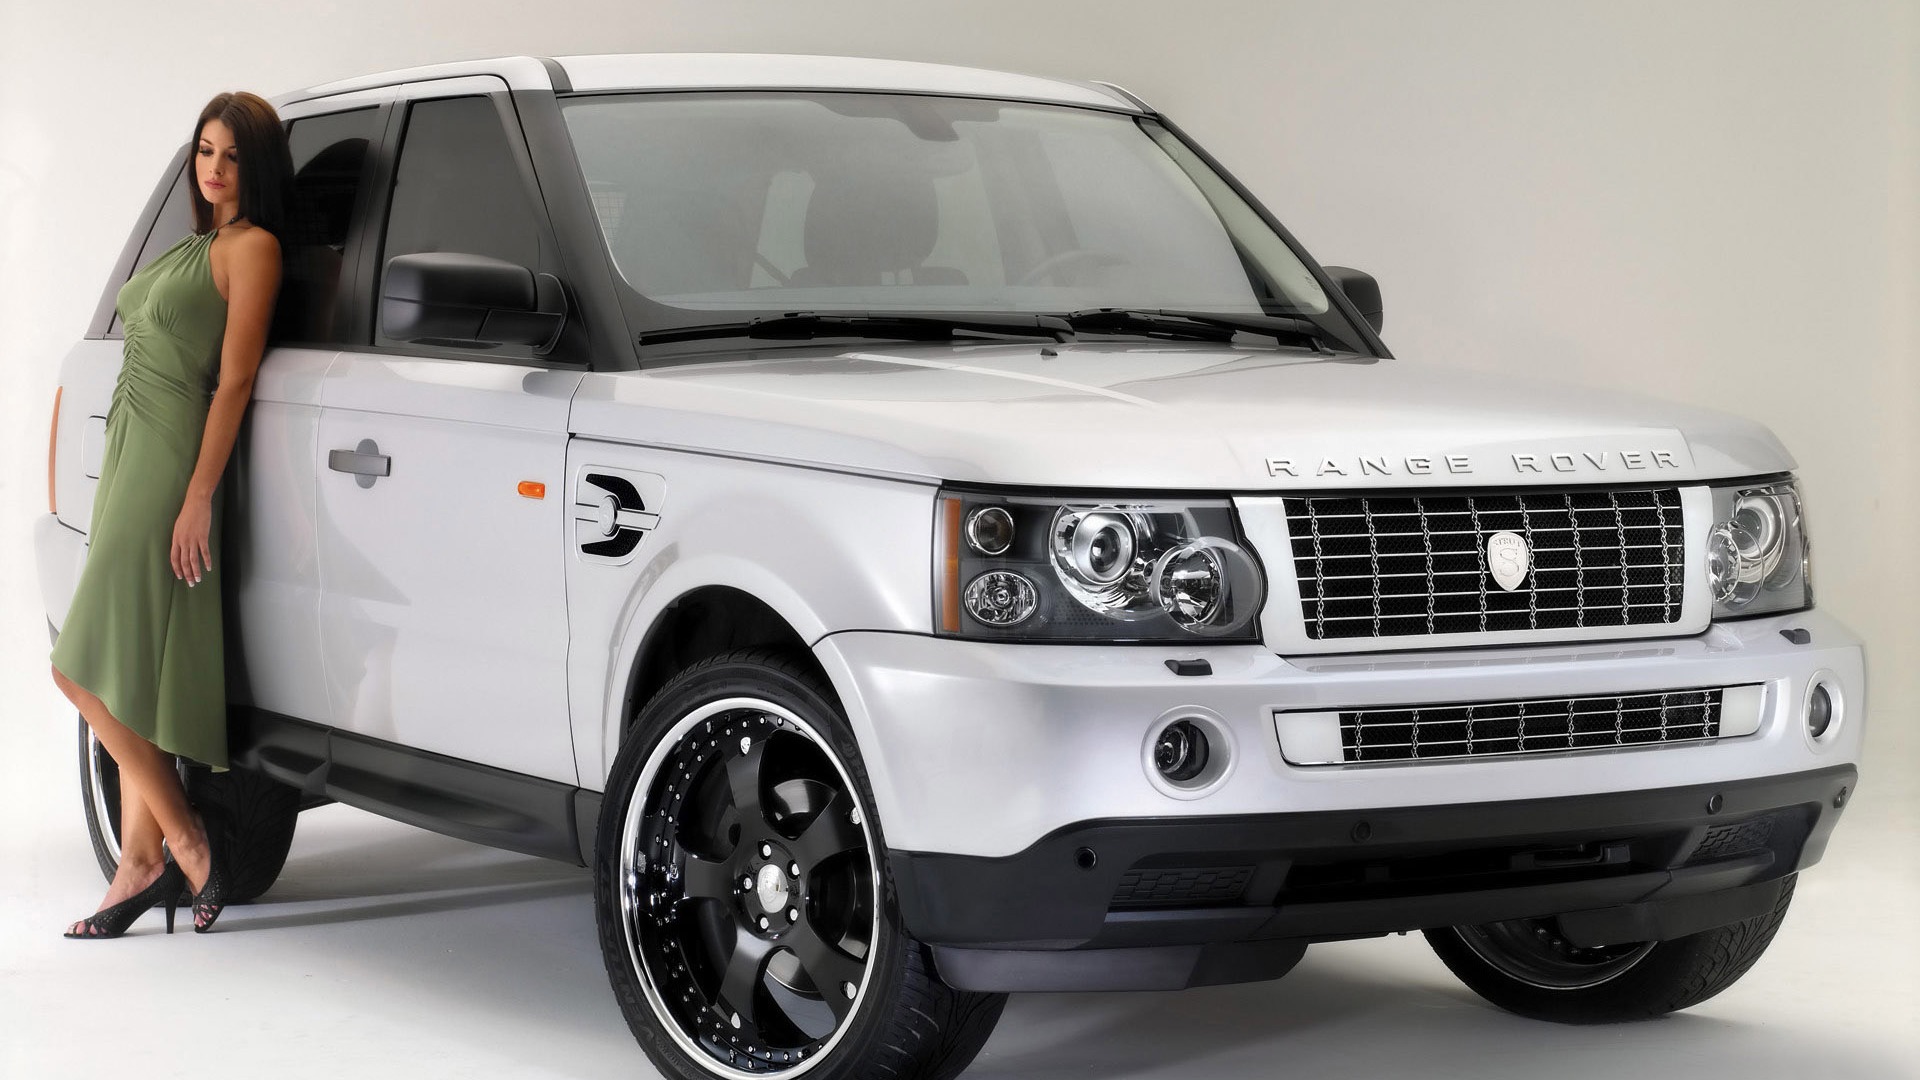 Land Rover Wallpapers Album #1 - 1920x1080